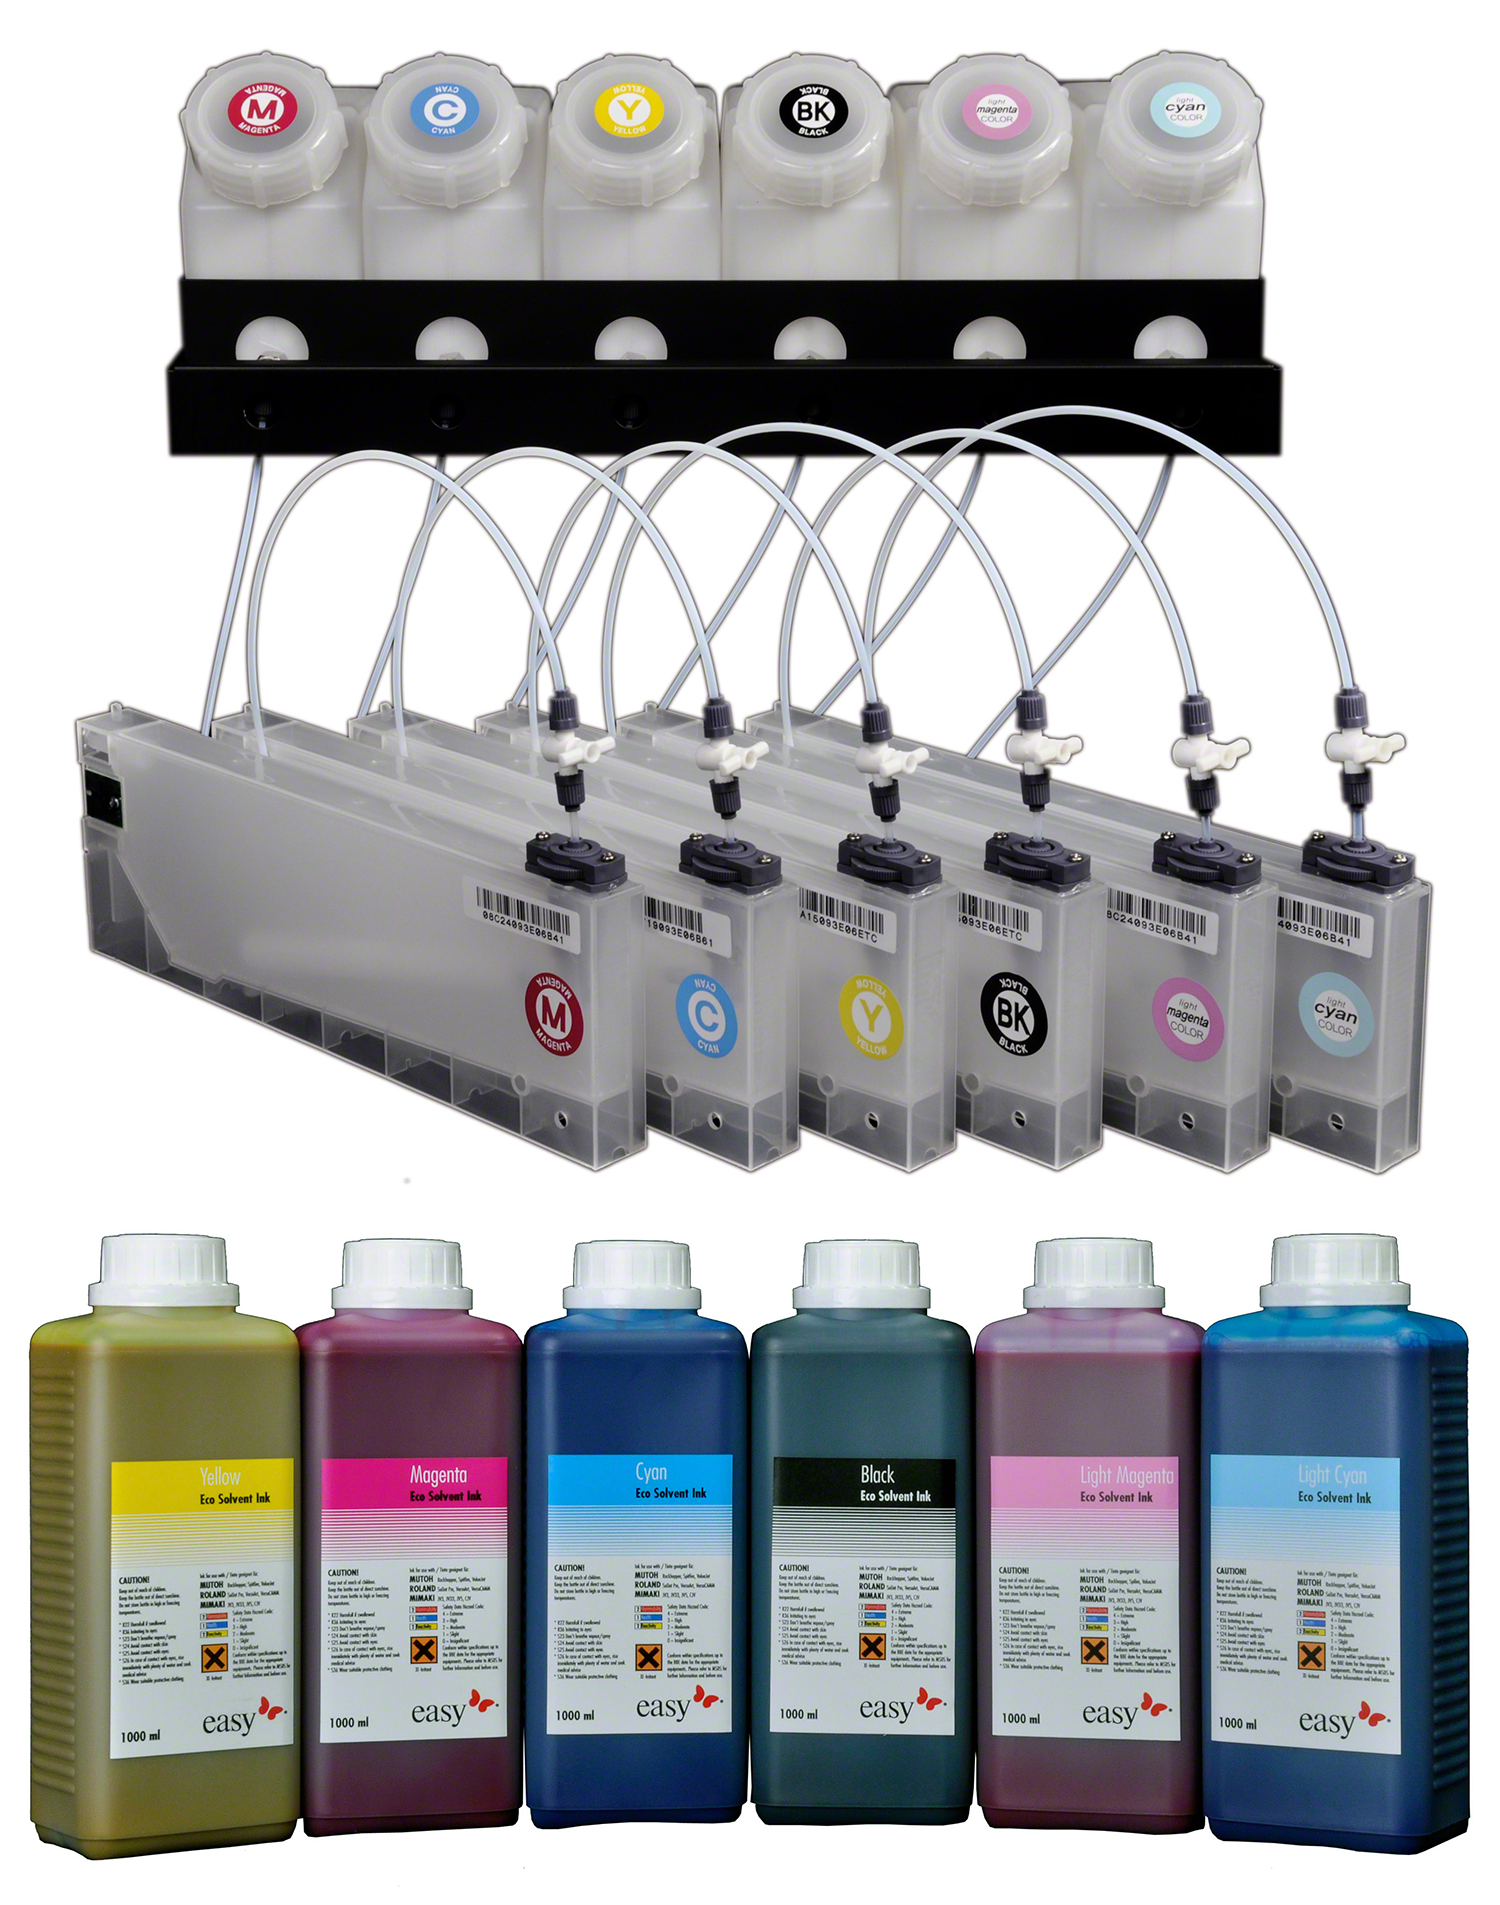 Blockoffer easyTank Continuous Ink Supply System for 2 x 4 colors, incl. 1 Liter Ink per Color